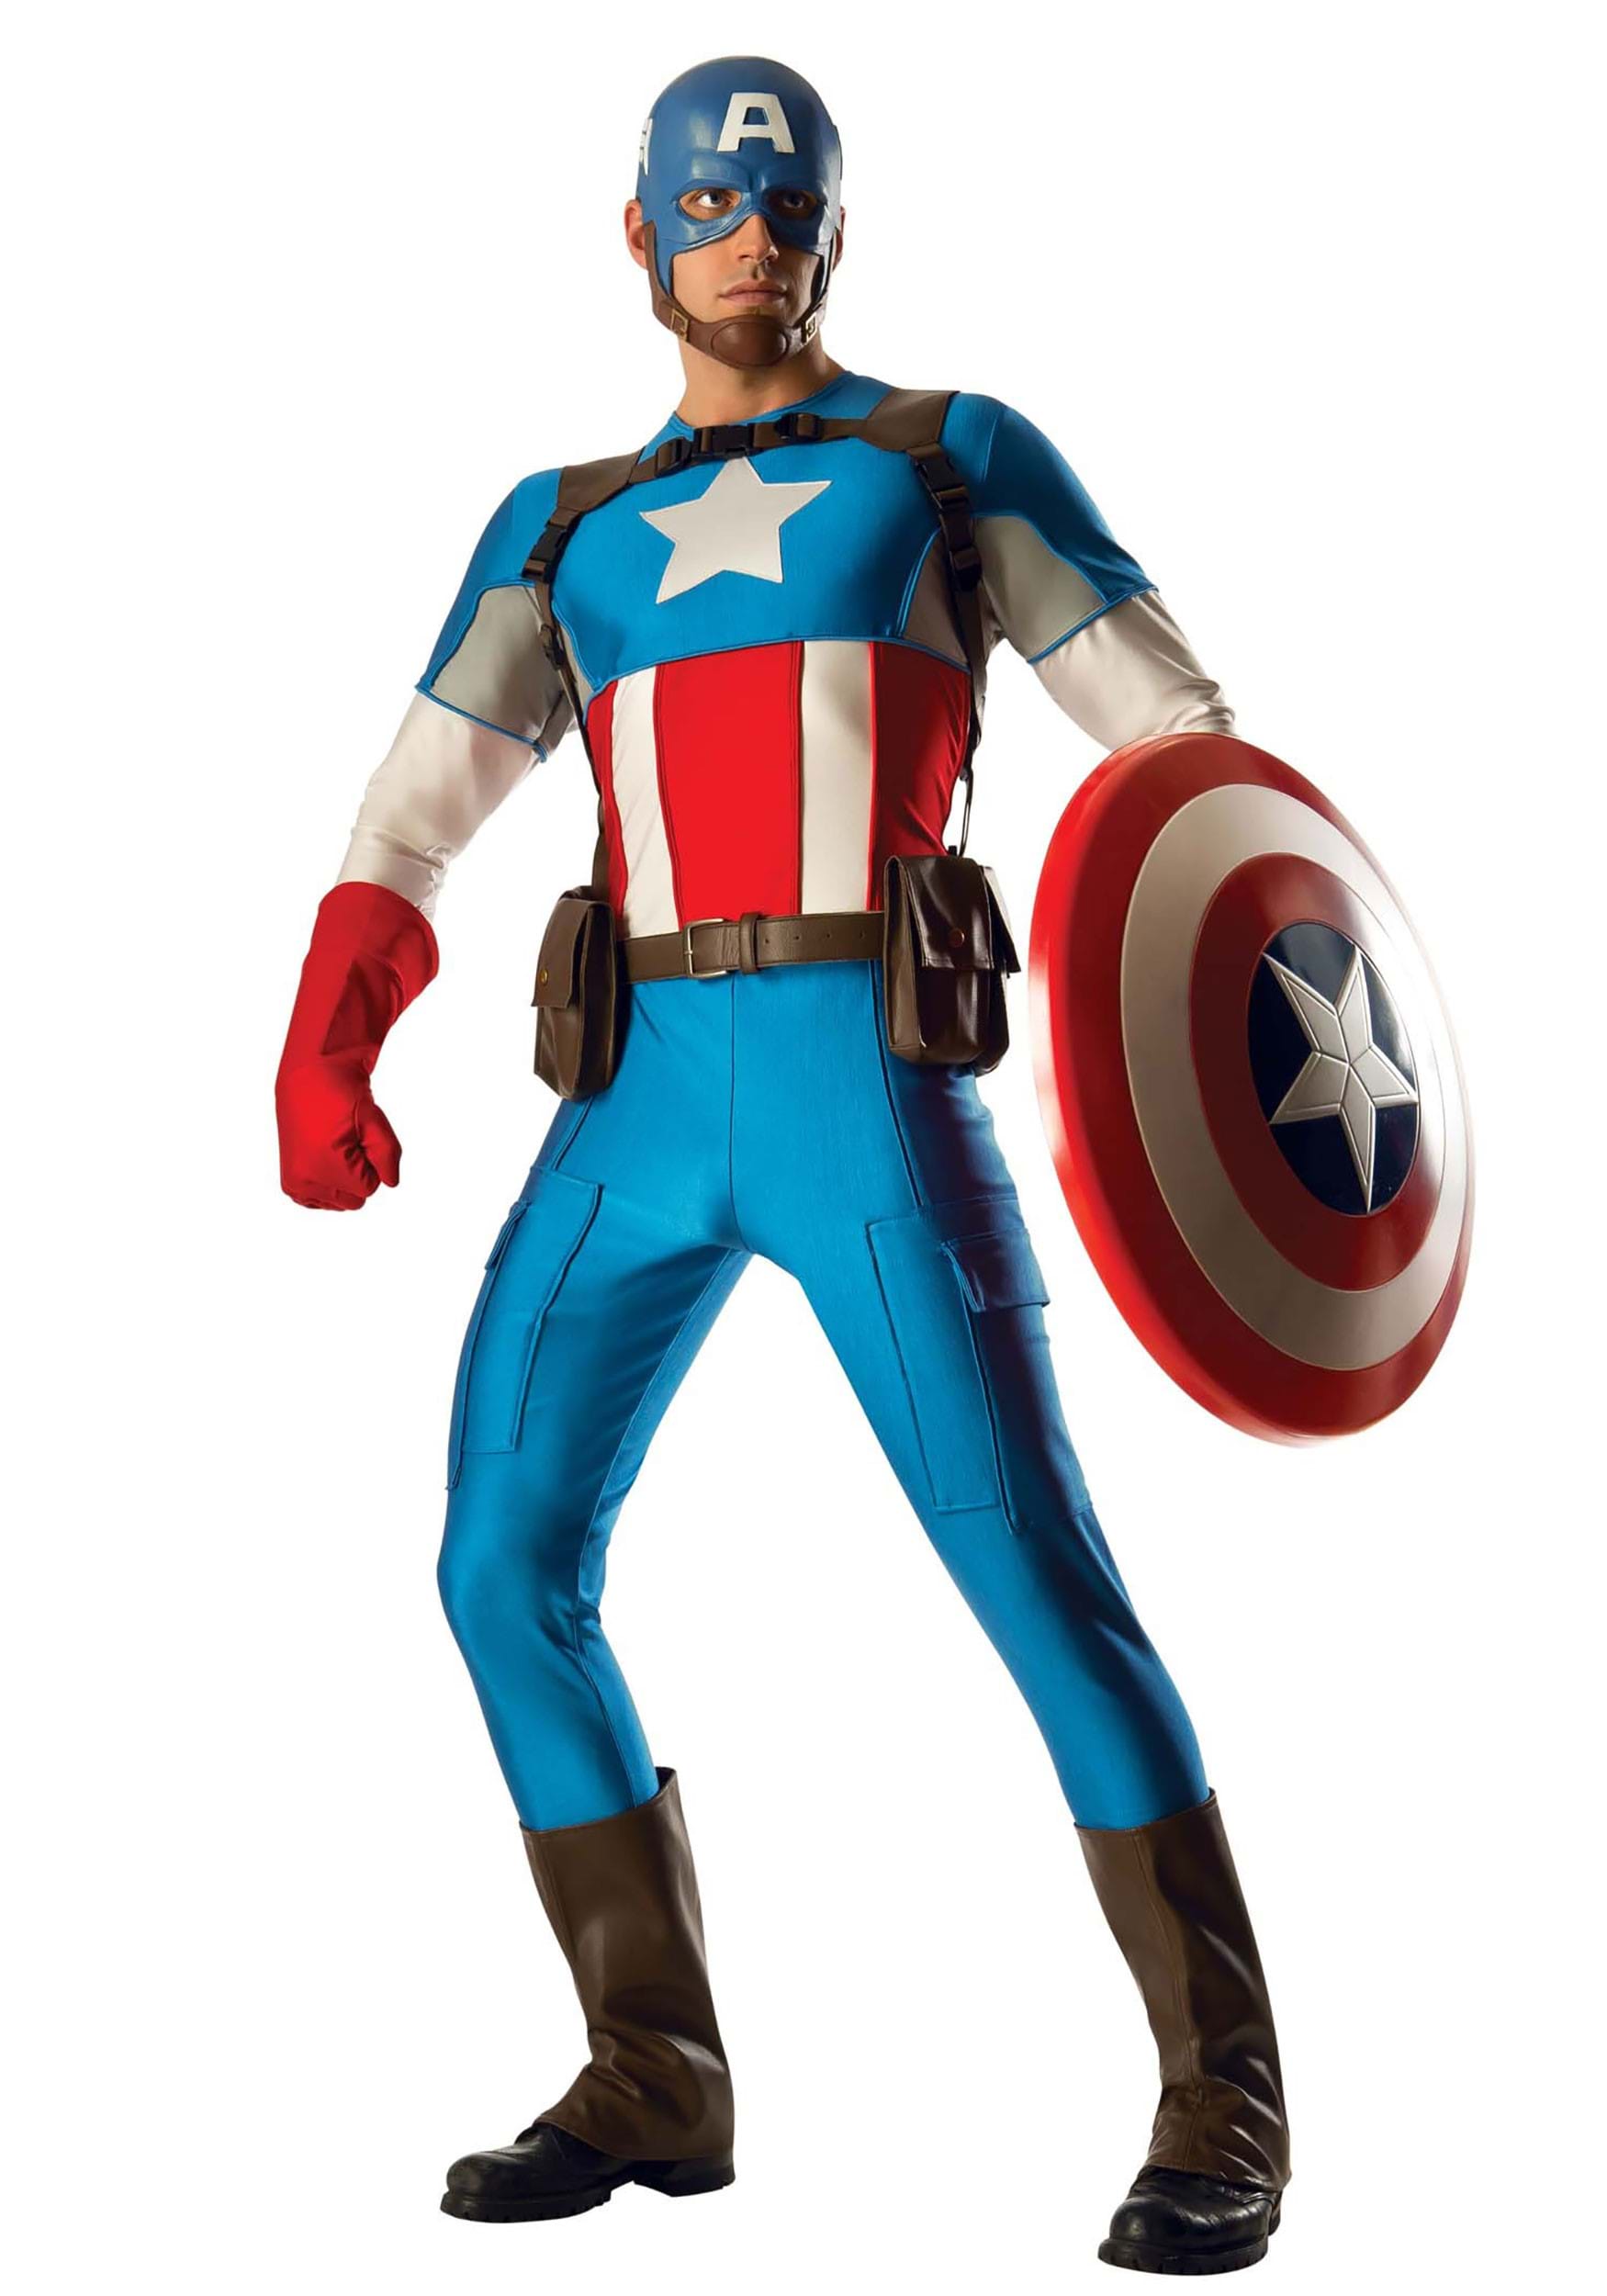 Hollywood Movie Costumes and Props: Captain America costumes from Avengers:  Endgame on display...